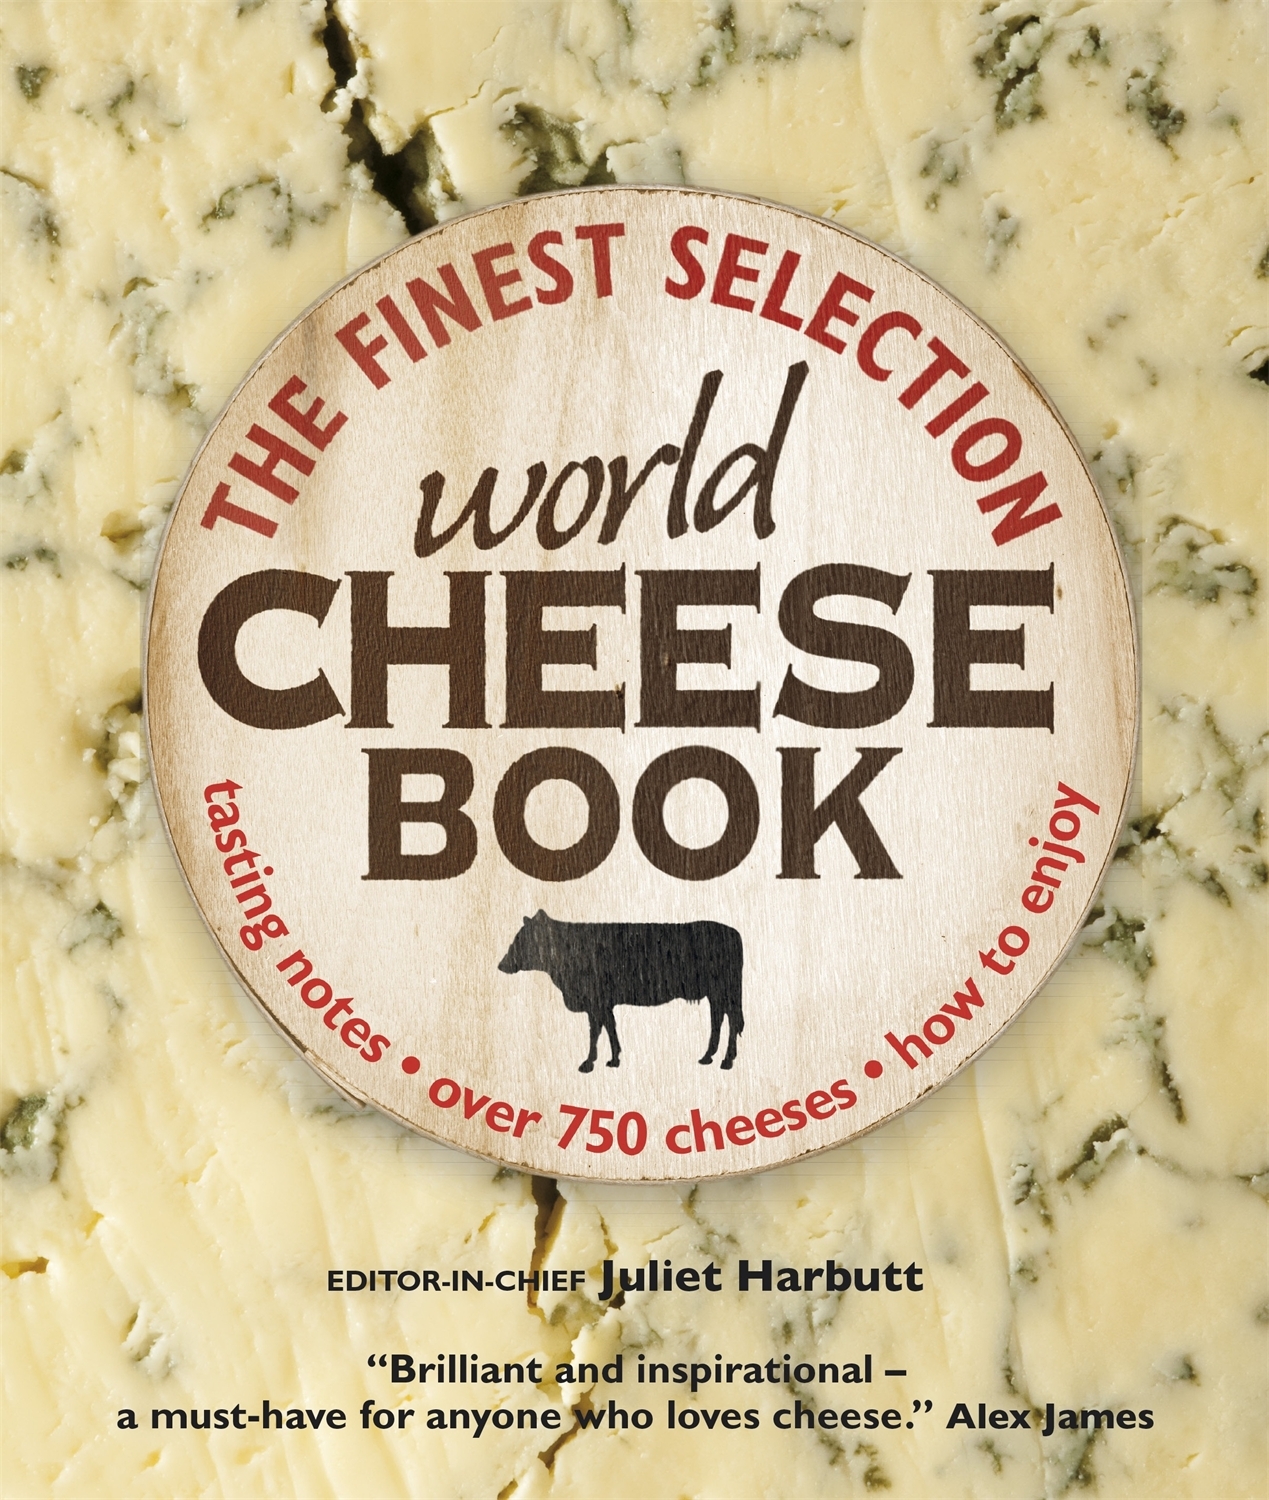 The World Cheese Book – A passionate review